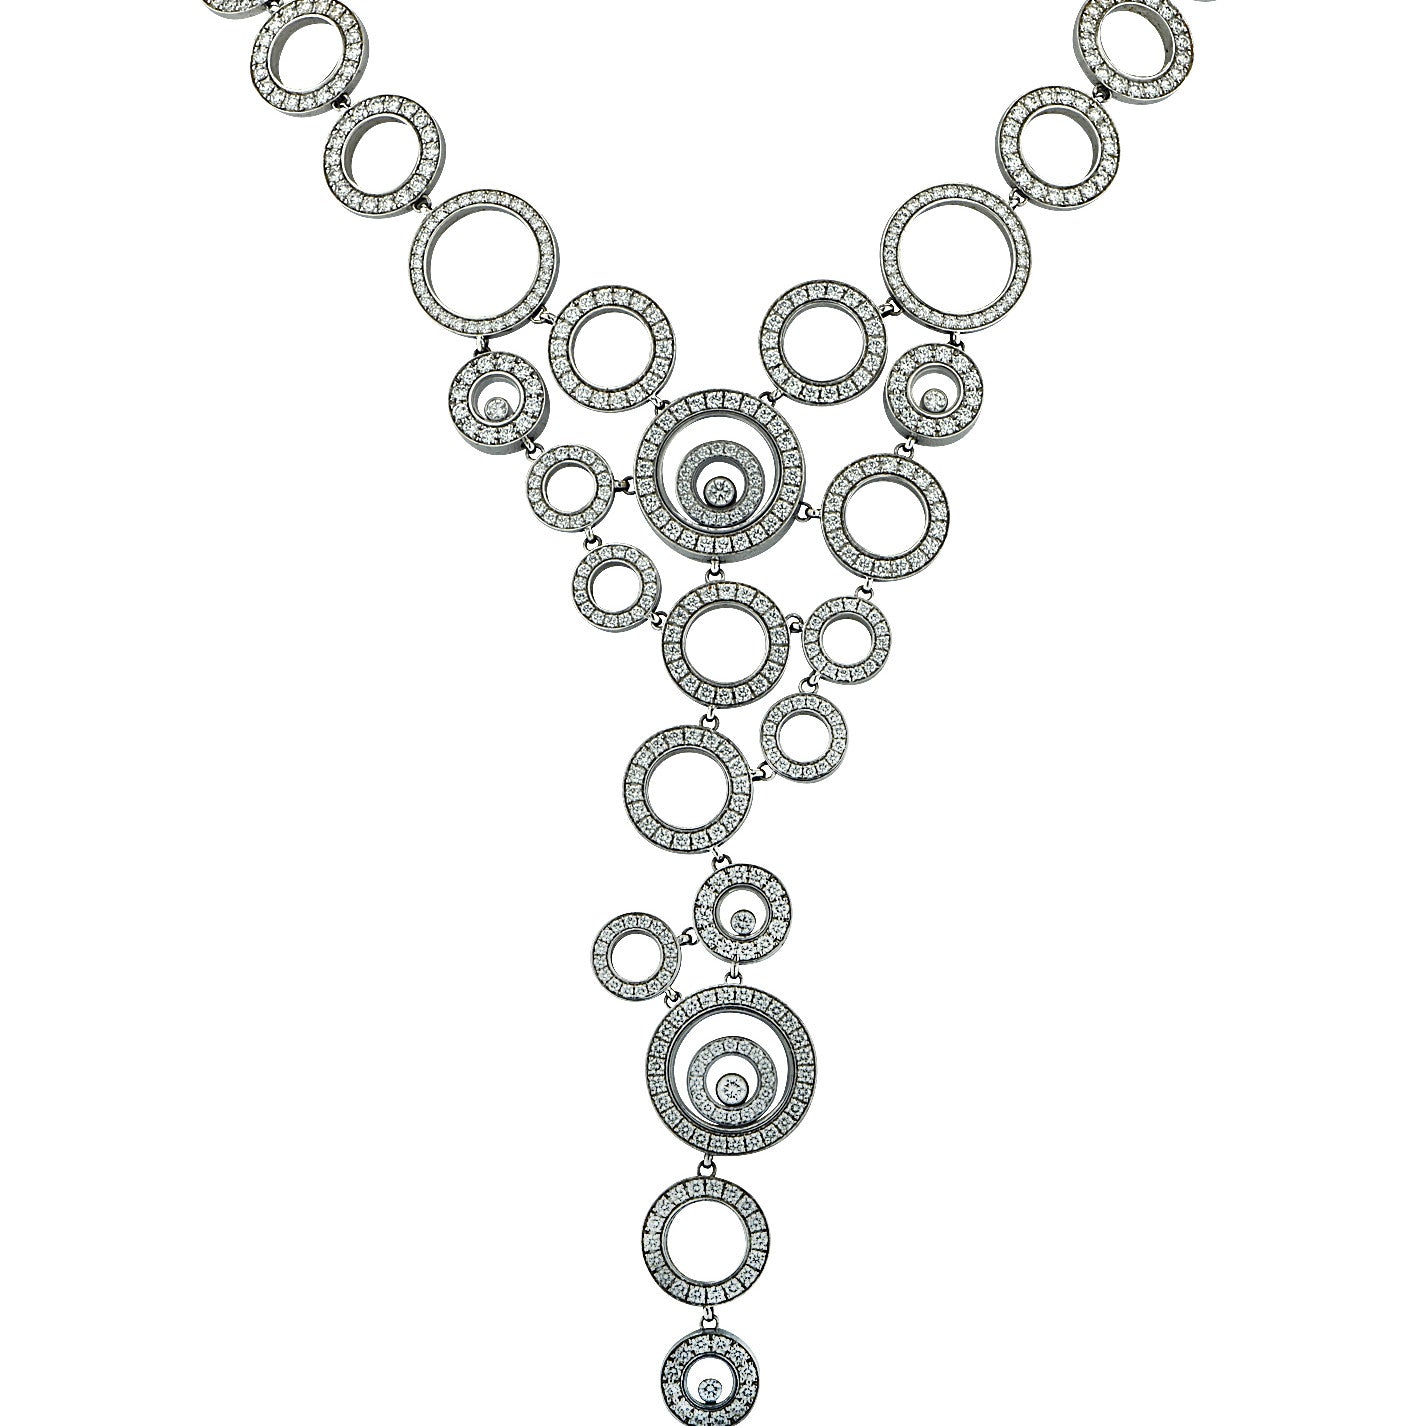 Chopard Post-1980s 18KT White Gold Diamond Necklace front view close-up